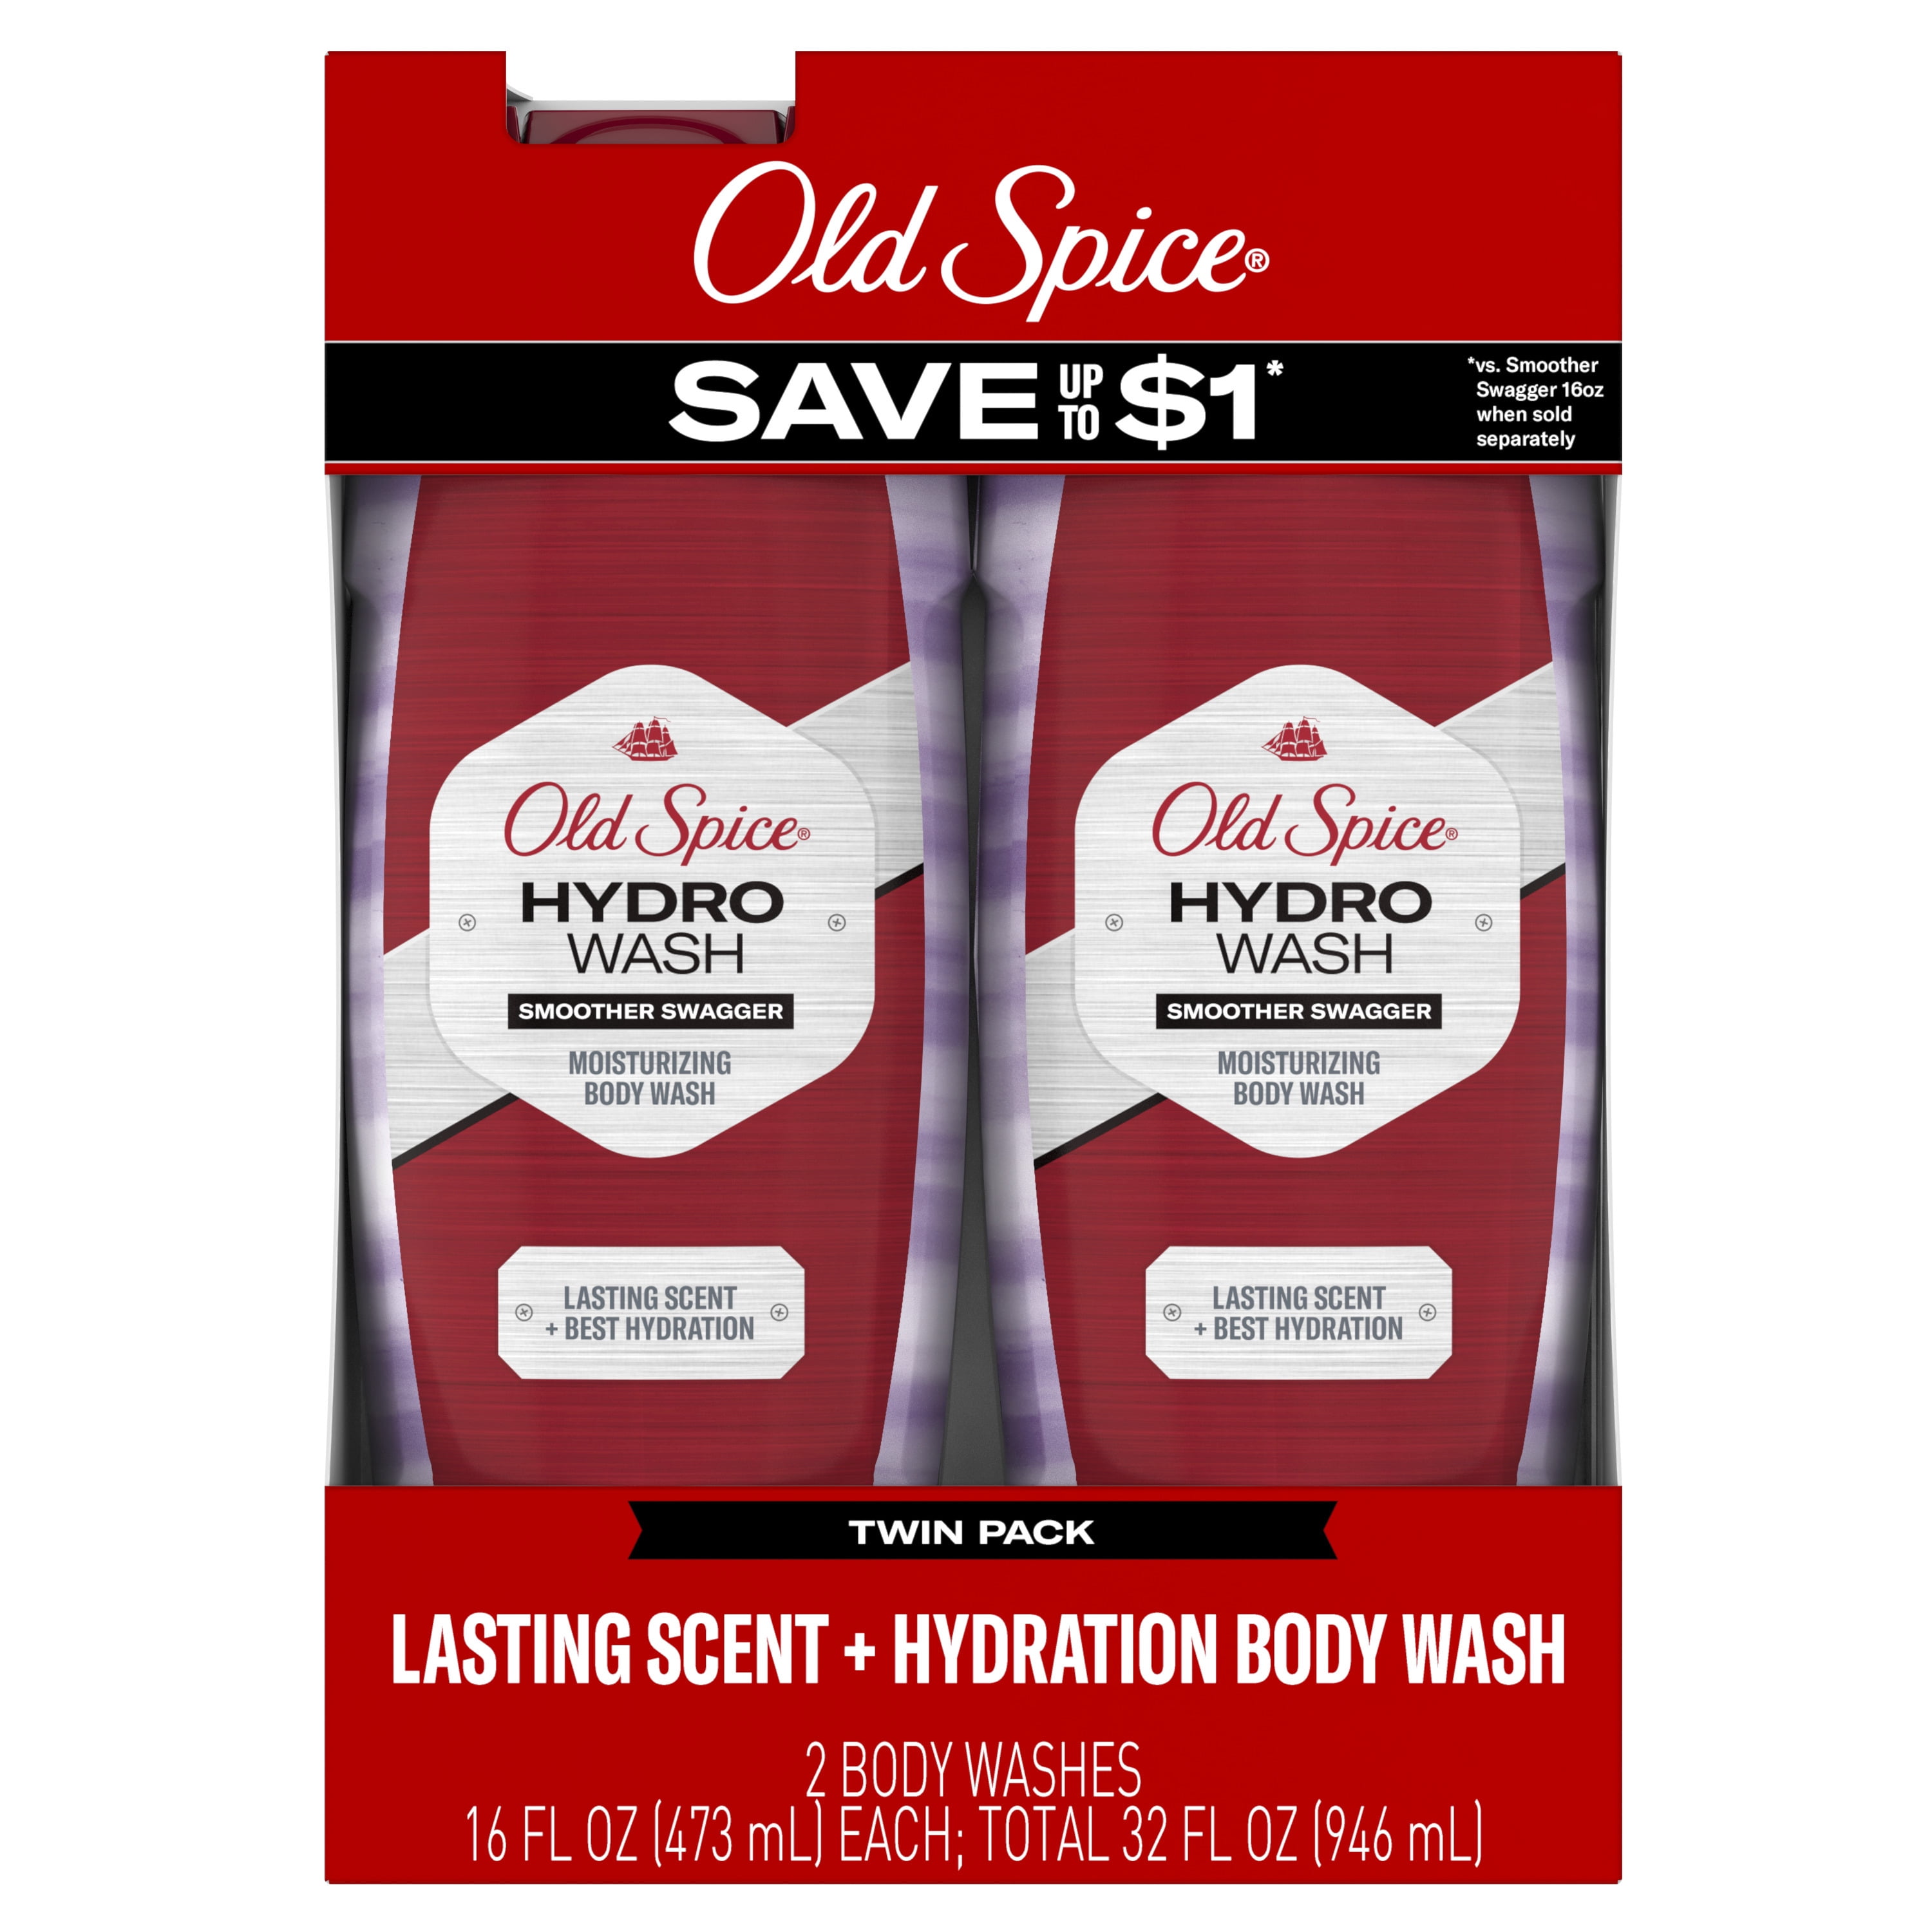 Old Spice Men's Body Wash Moisturizing Hydro Wash Smoother Swagger, 16 oz, Pack of 2